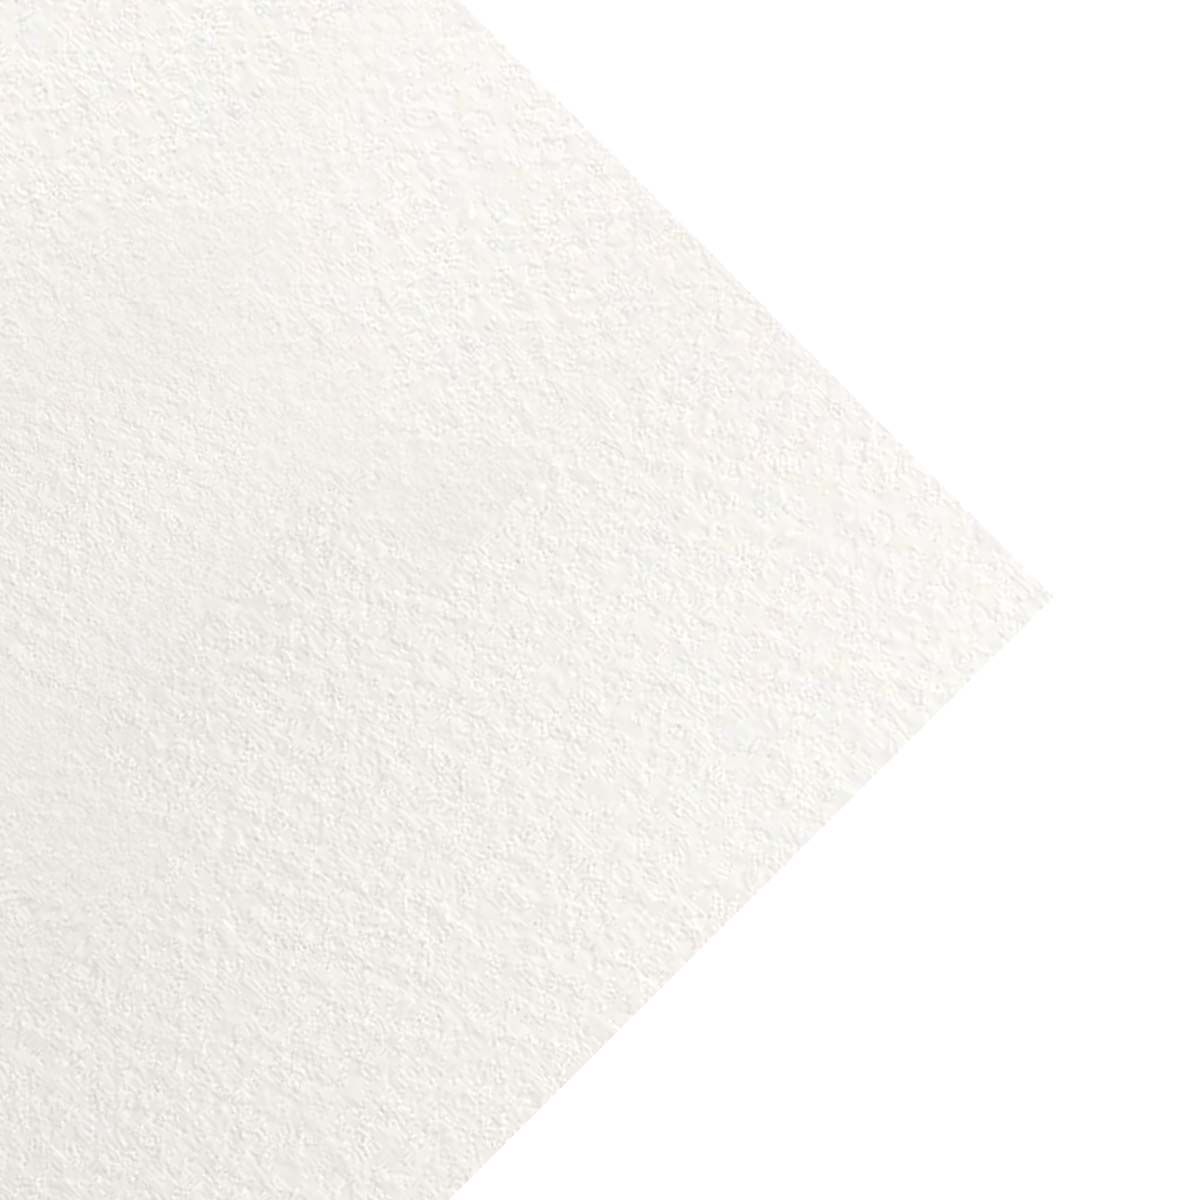 Waterford Watercolor Paper 300 lb Cold Press 22" x 30" (Pack of 10)